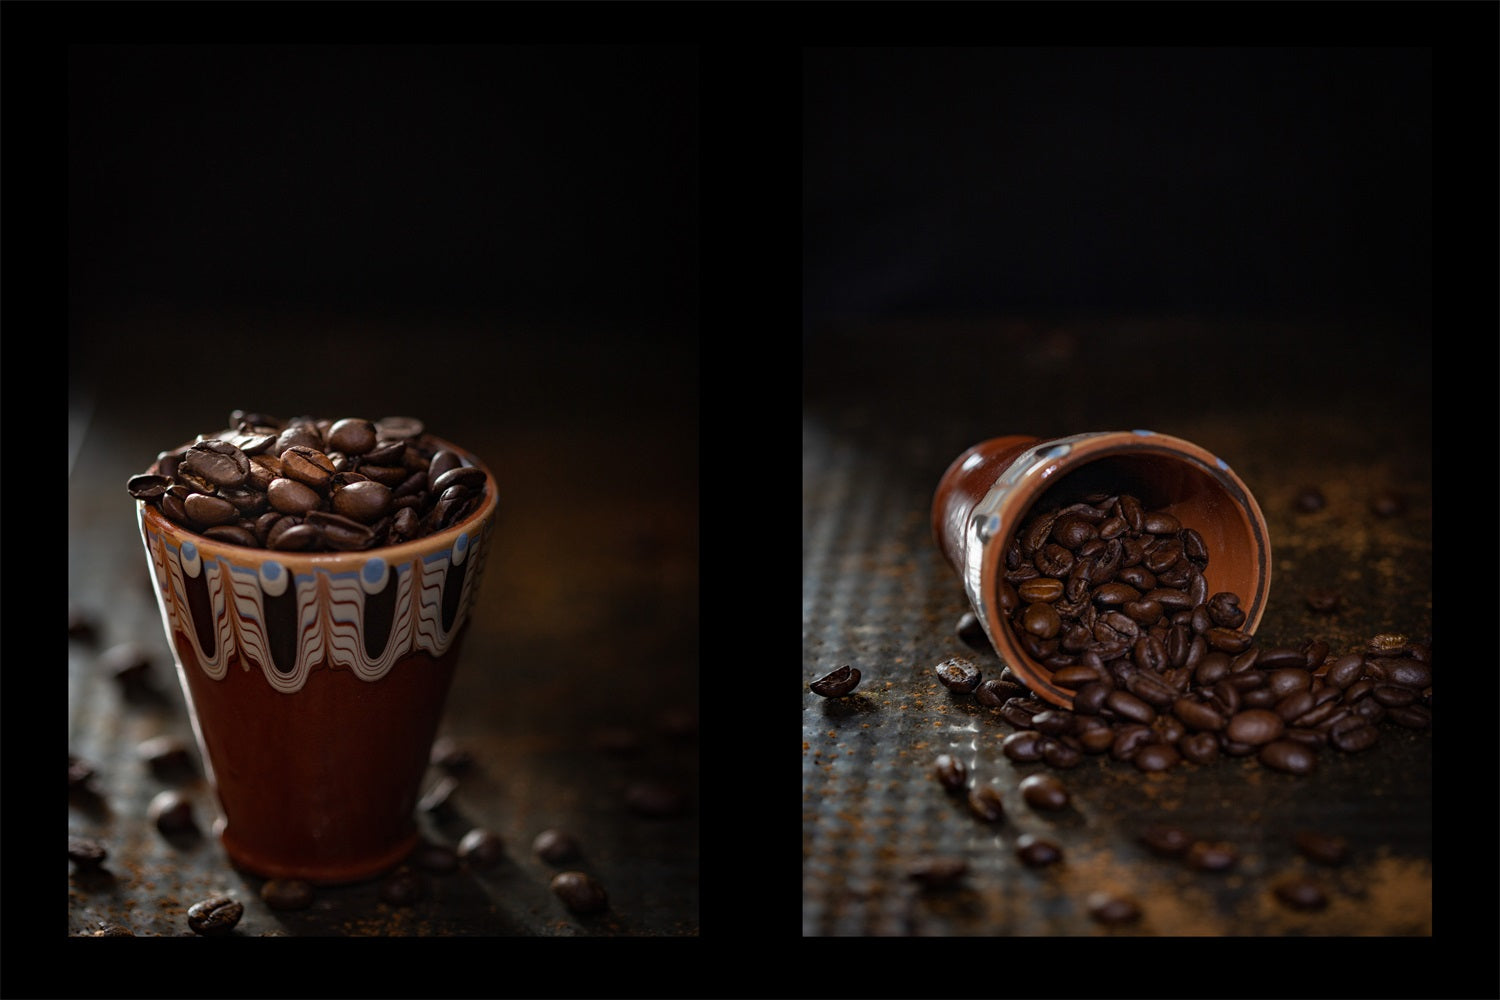 diptychs of a cup of coffee beans photo by Katarzyna Golembowska on shutterstock